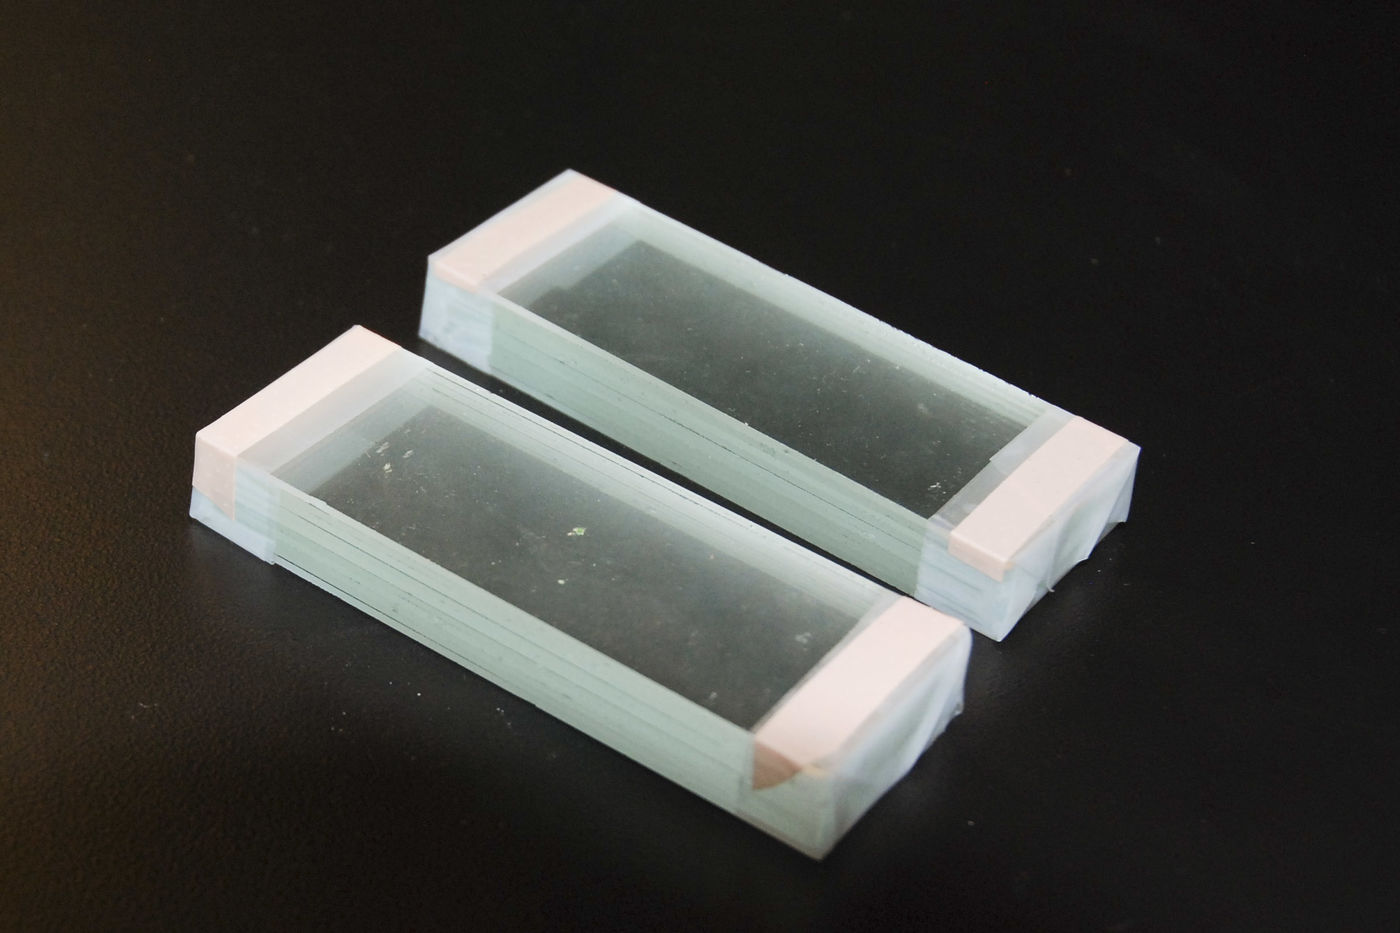 Two glass blocks. Each is 10 glass microscope slides held together with tape wrapped around the ends. Strips of Band-Aid fabric are applied to the top to provide some friction between the block and whatever you put on top of it.